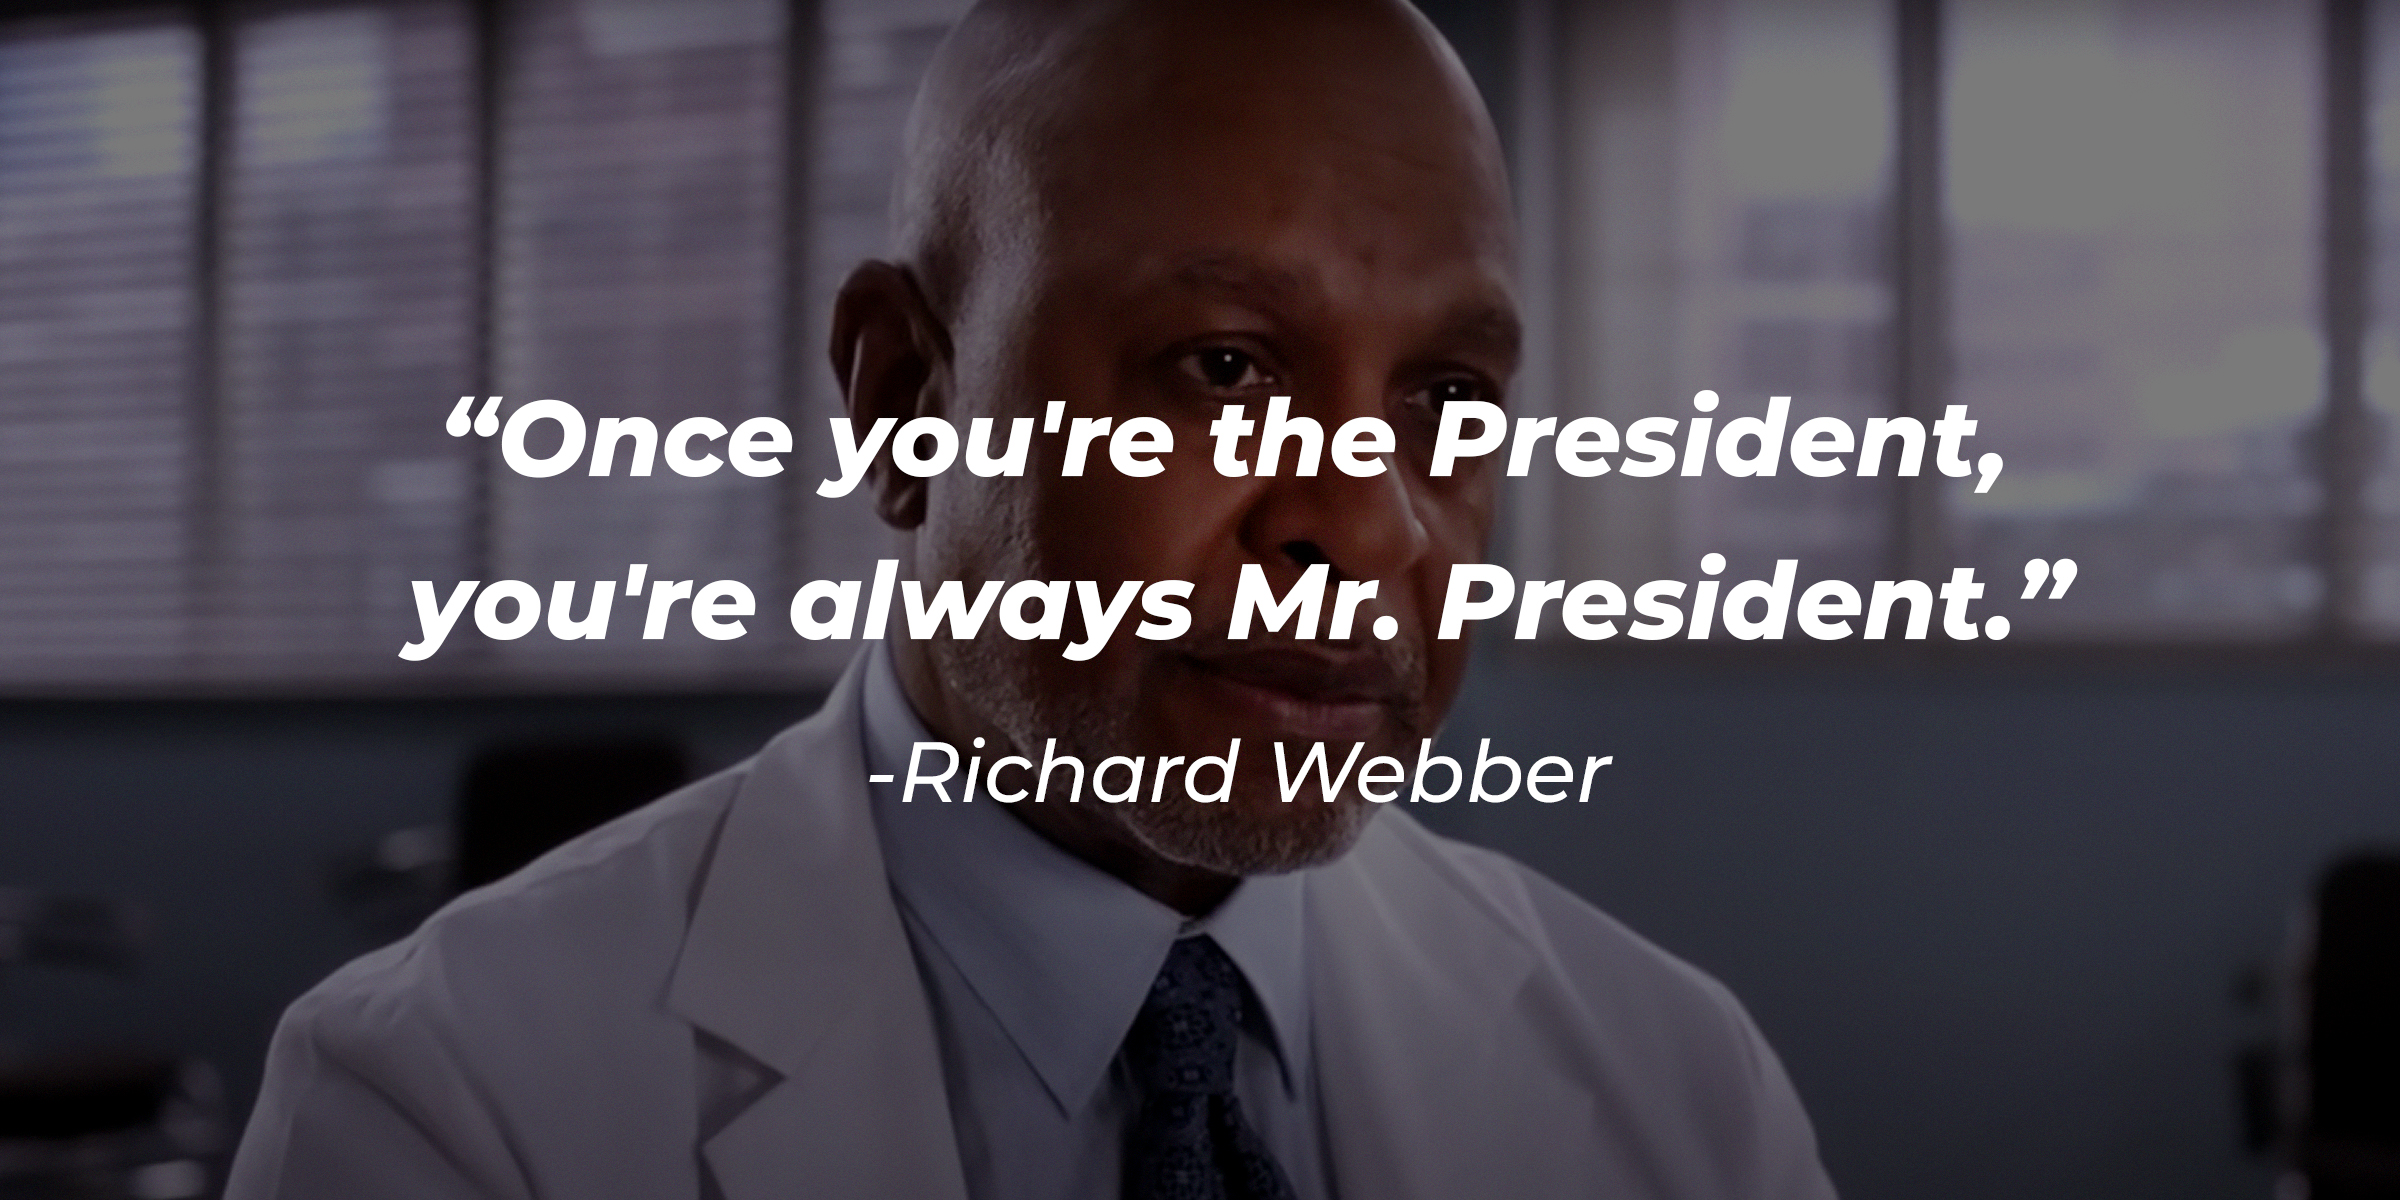 Richard Webber with his quote: "Once you're the President, you're always Mr. President." | Source: Facebook.com/GreysAnatomy